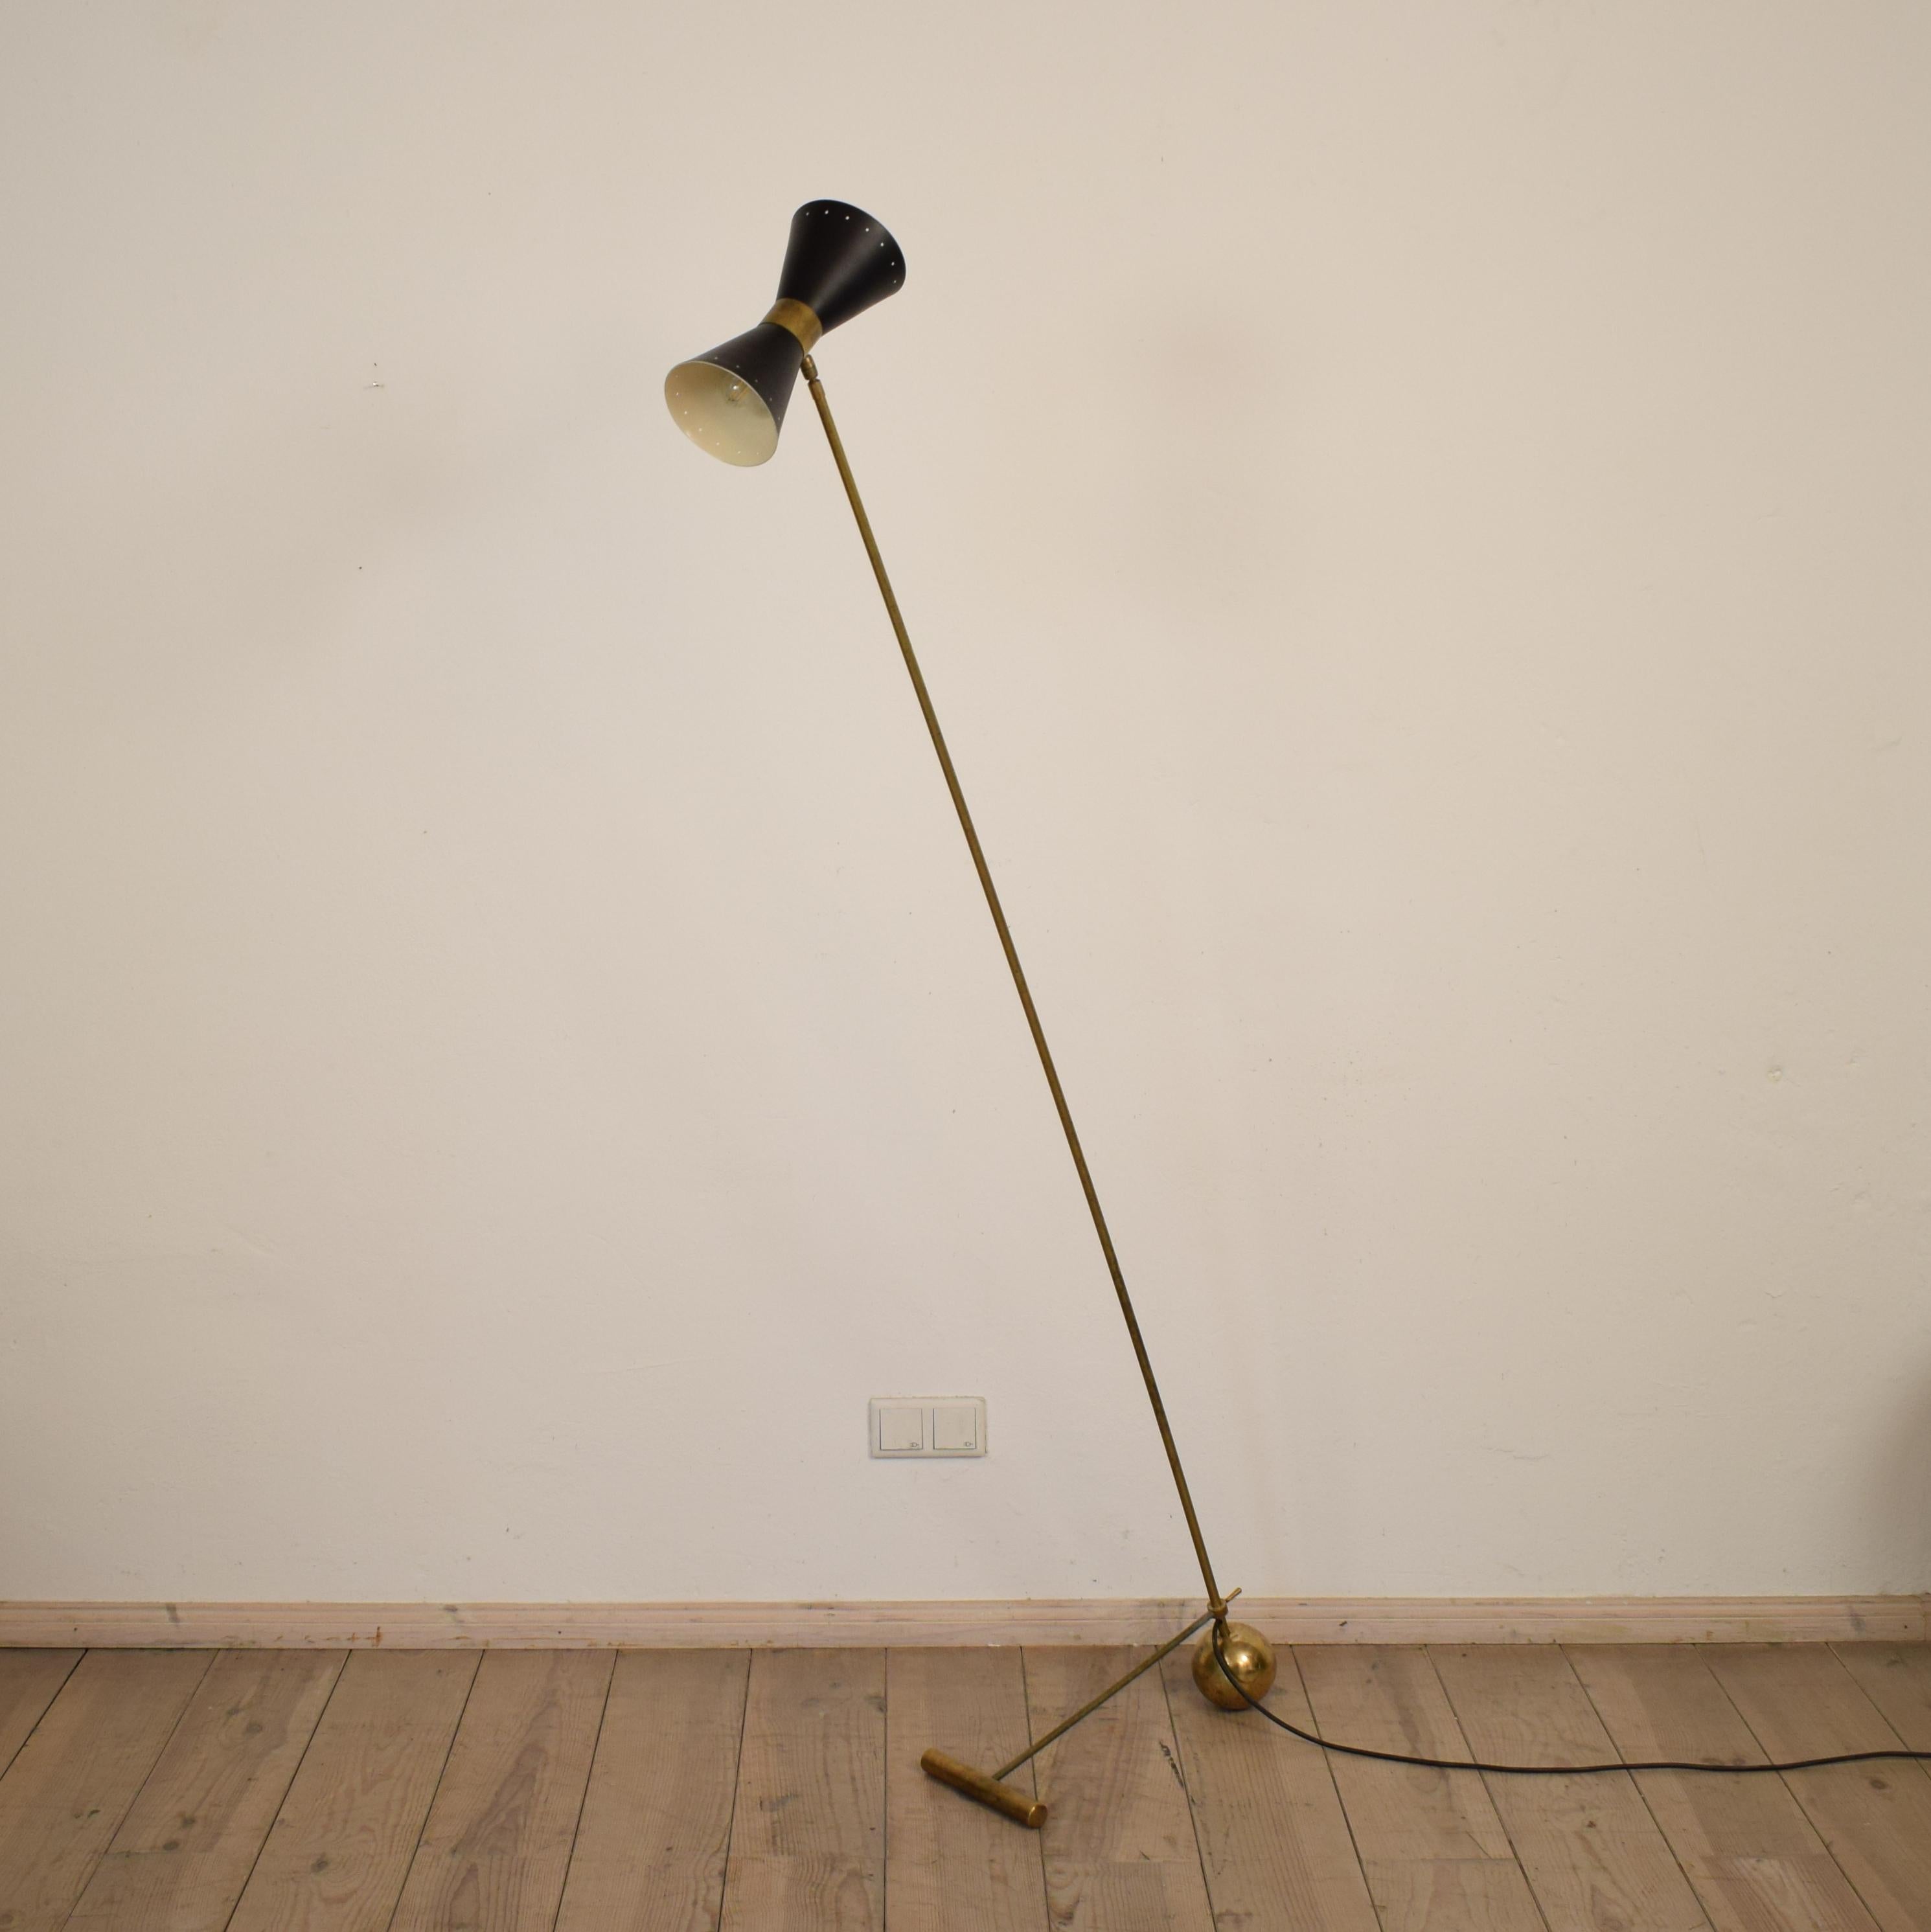 This beautiful floor lamp from Italy in the style of Stilnovo is in excellent 
condition and shows great patina.
The angle of the base can be adjusted and the lamp shades can be turned and angled in every direction.
The black Lamp shade is